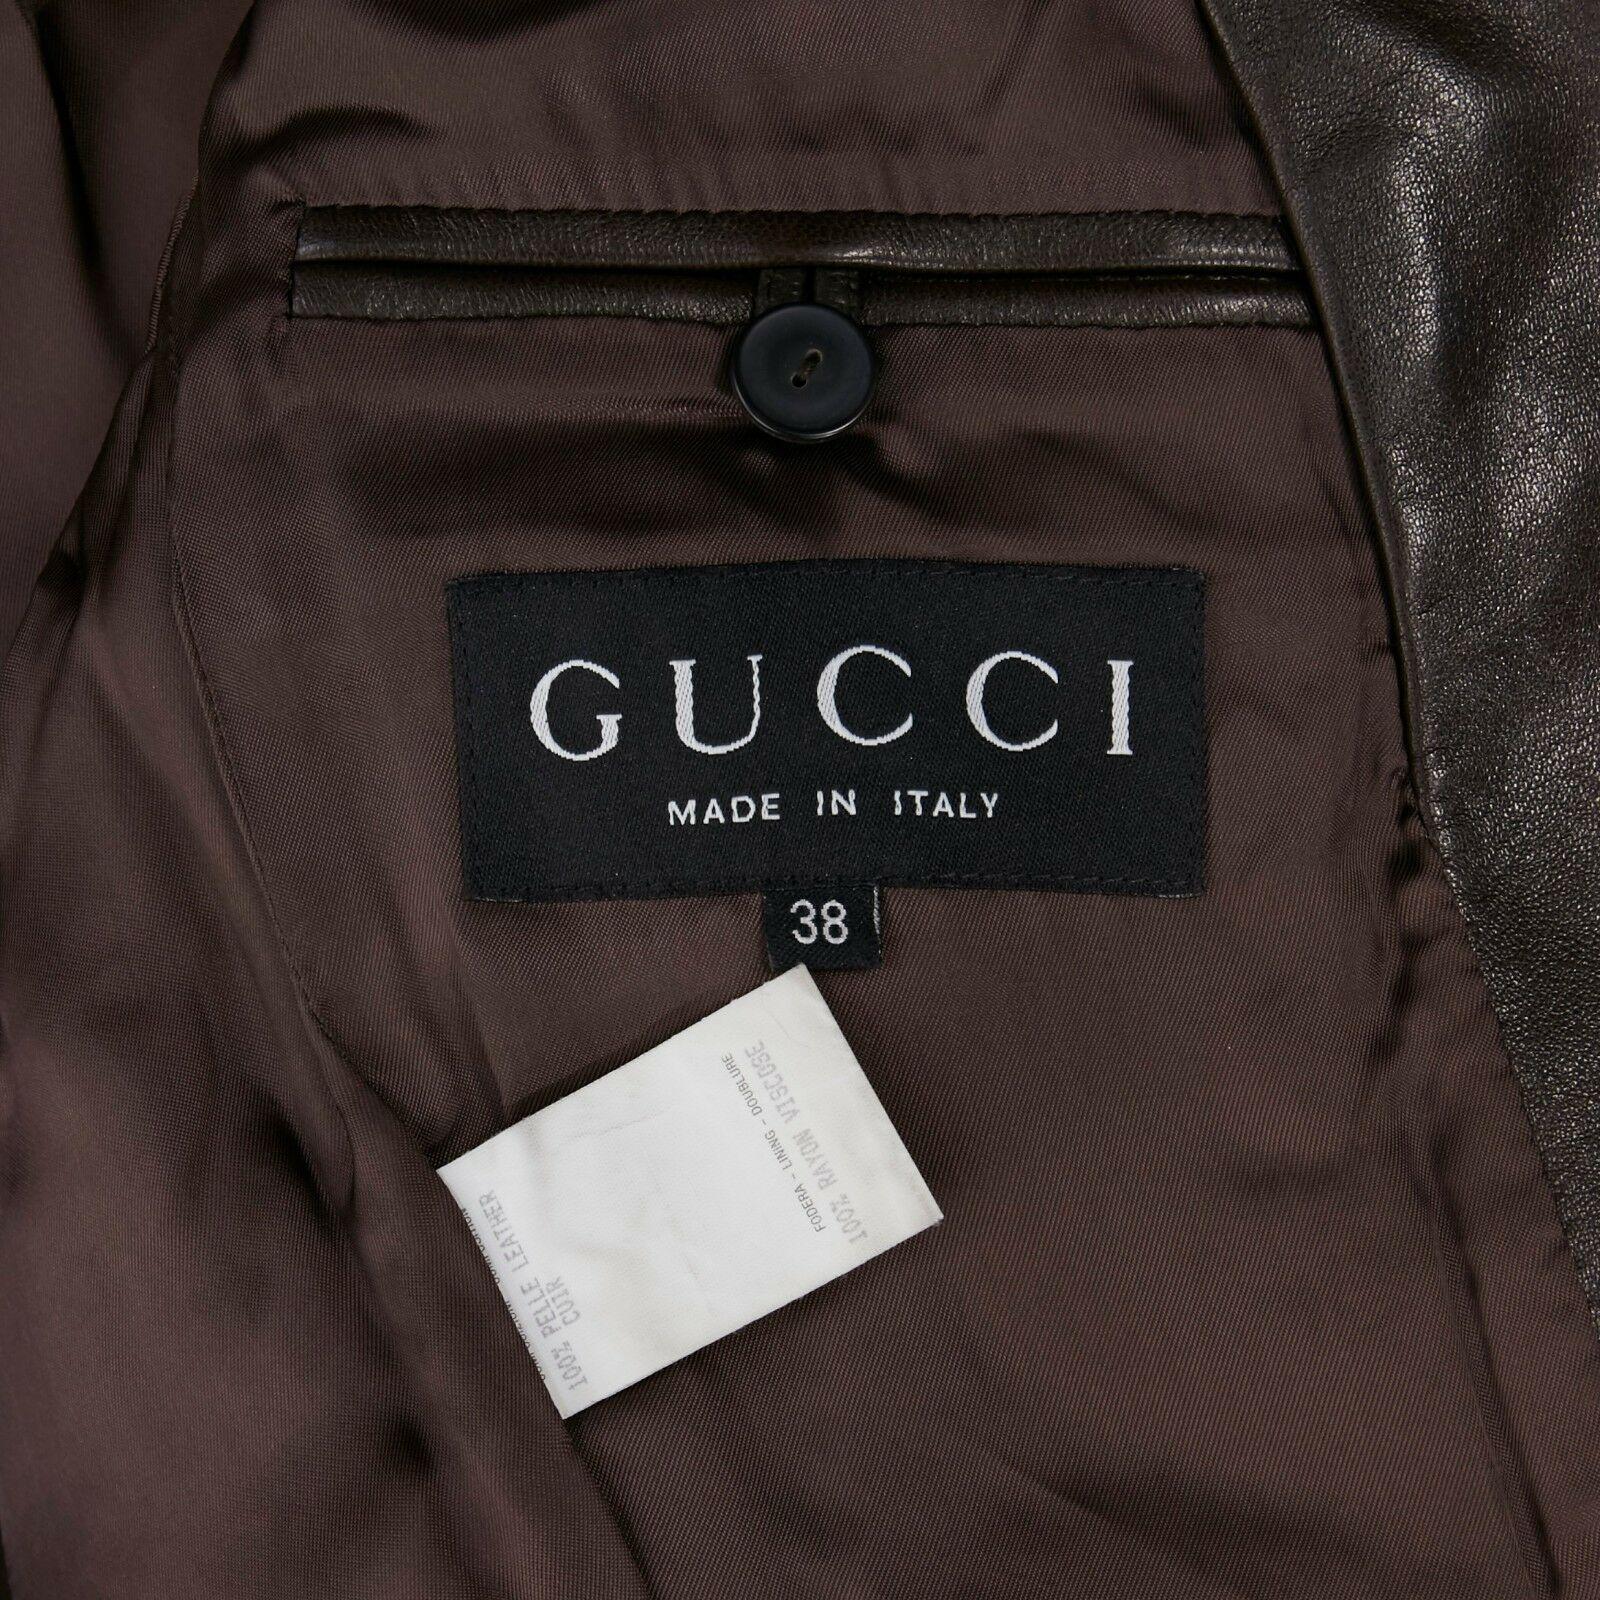 runway GUCCI TOM FORD AW96 brown leather classic blazer jacket coat ...